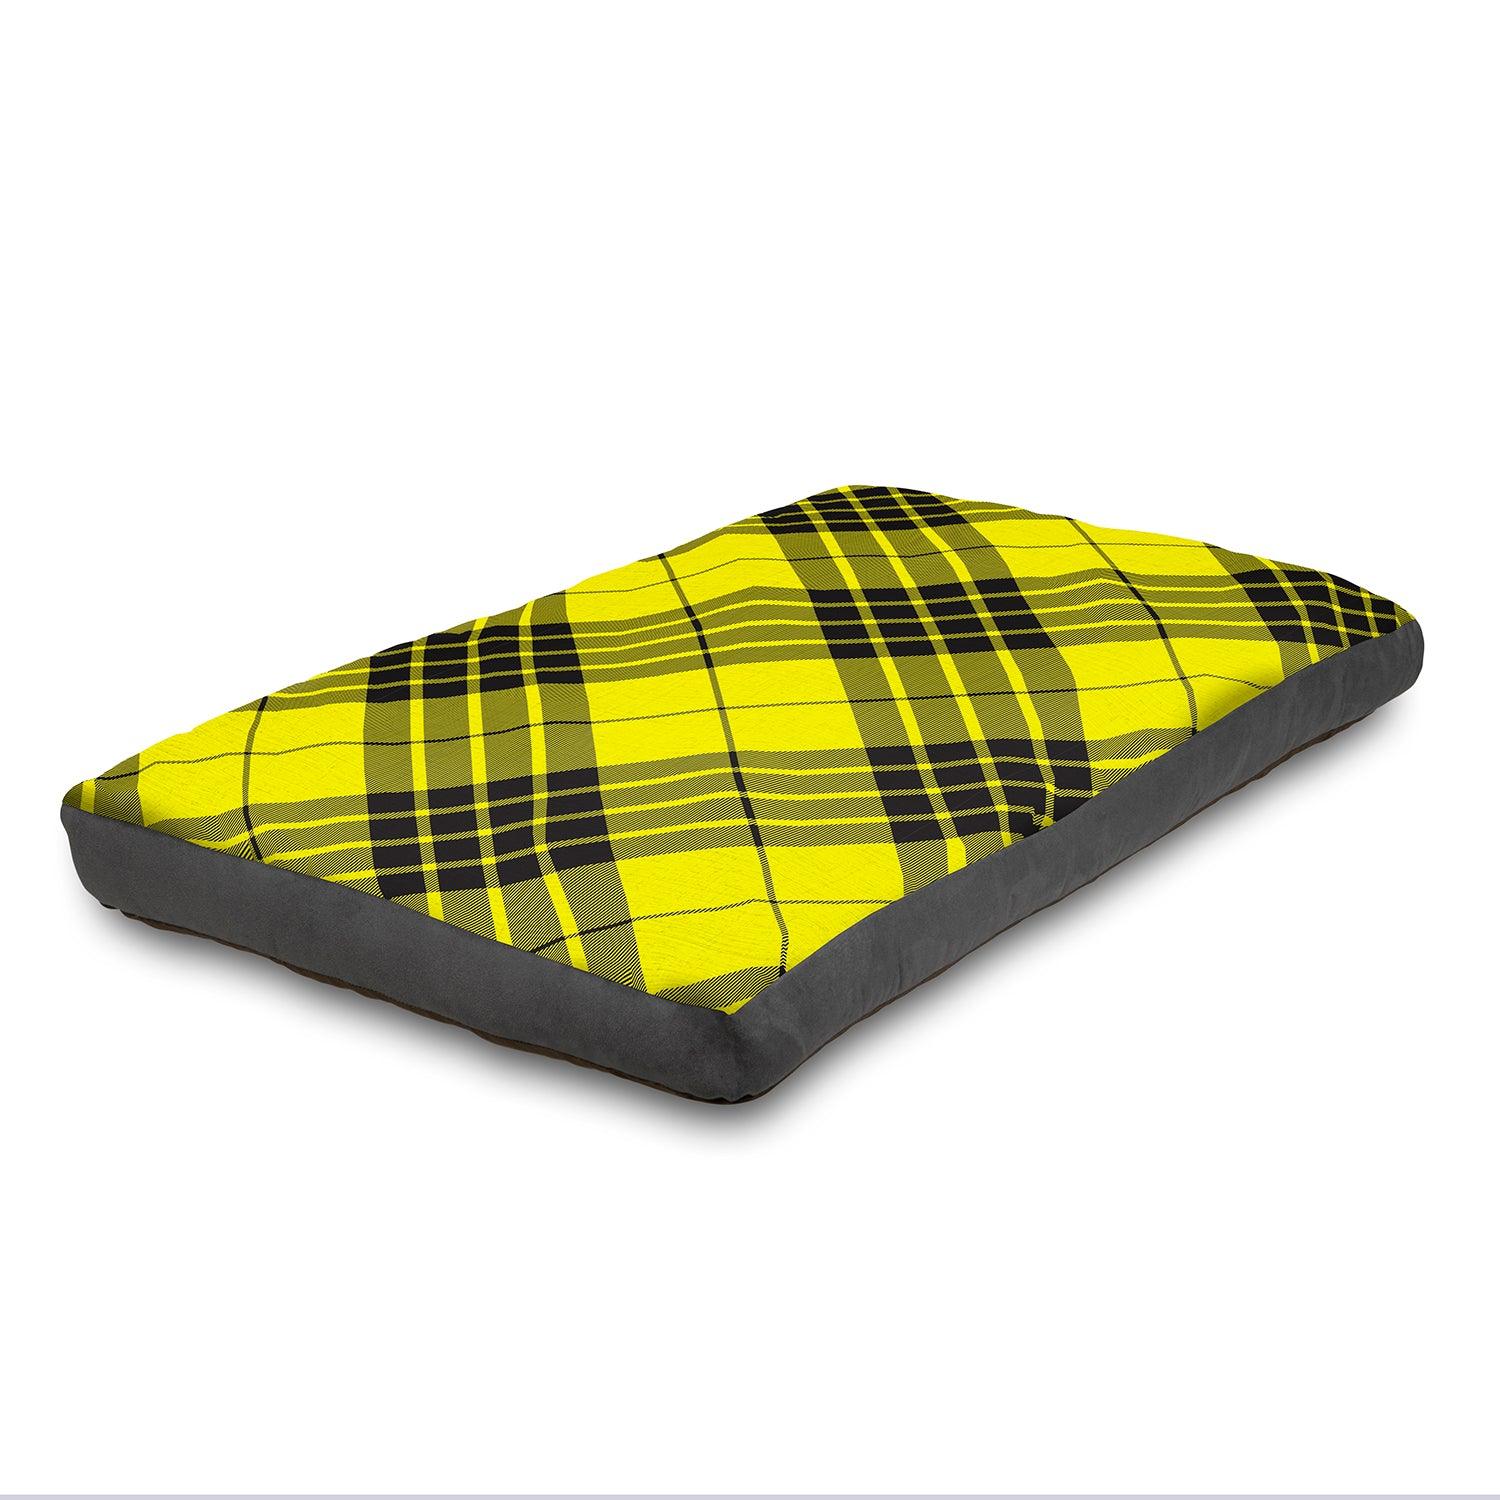 View Super Comfy Dog Bed Soft and Fluffy with Washable Cover Medium 100 cm x 65 cm Yellow information